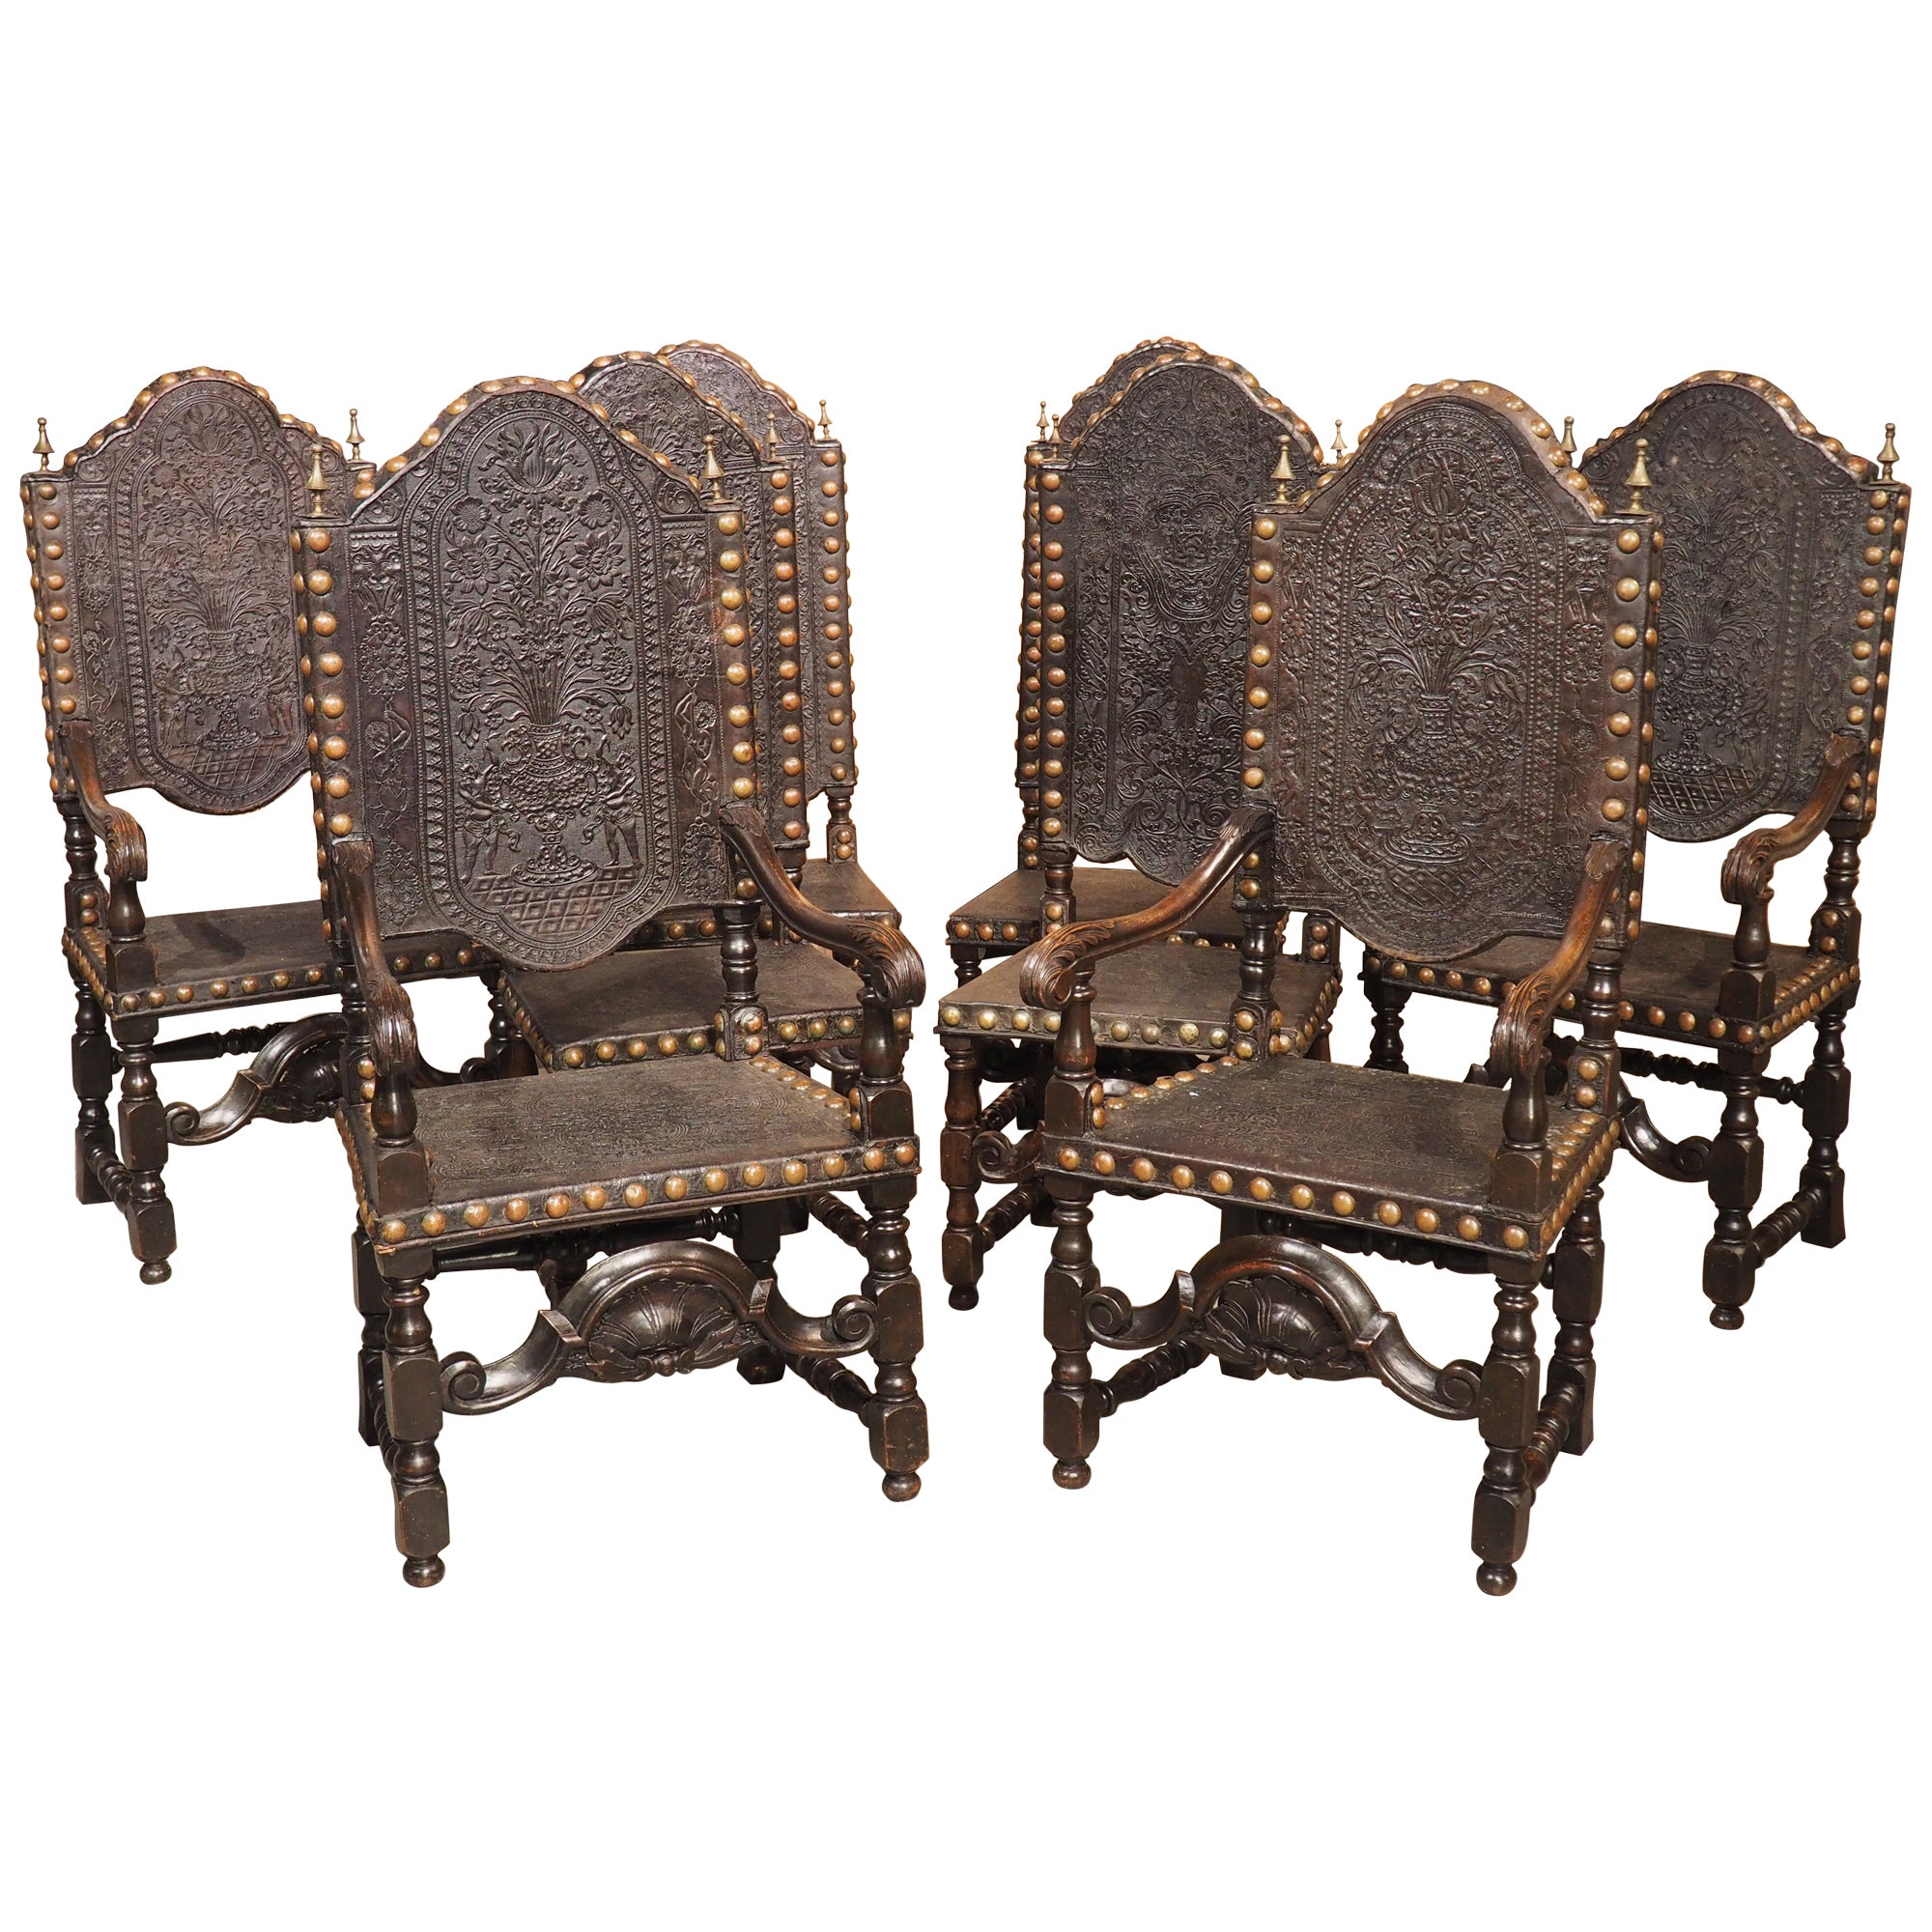 Rare Set of Eight 19th Century Spanish Embossed and Studded Leather Chairs